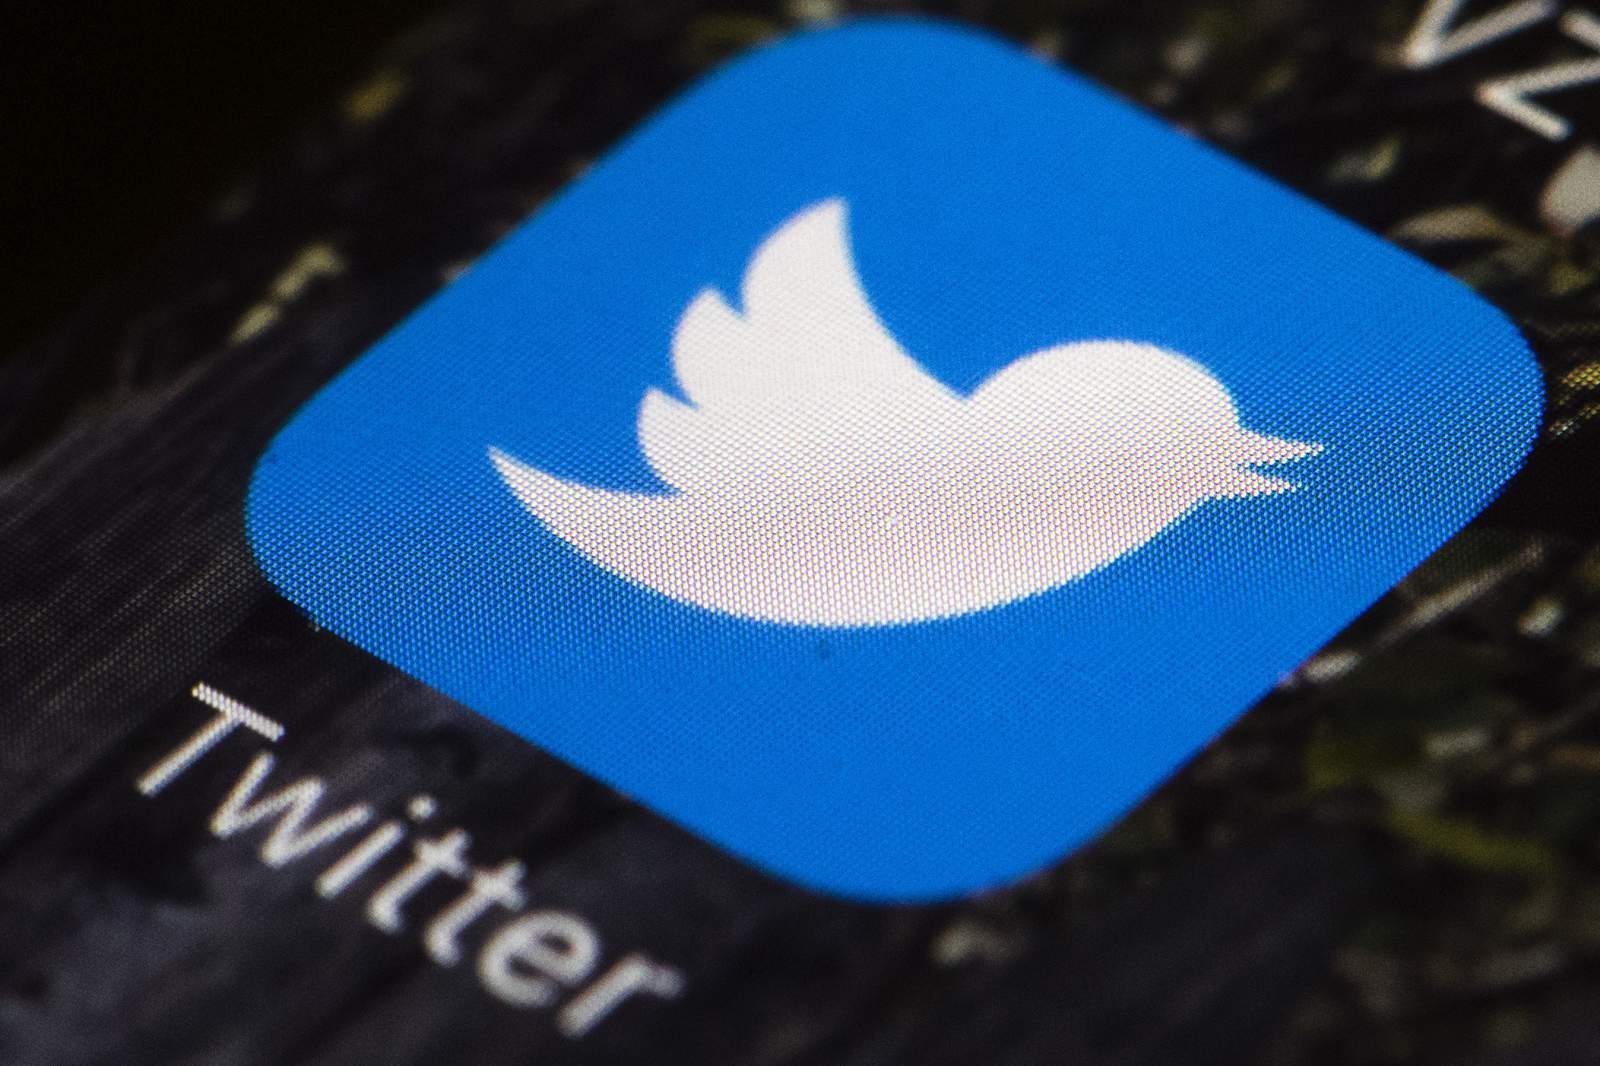 White male teacher accused of posing as immigrant woman to make racist, sexist comments on Twitter